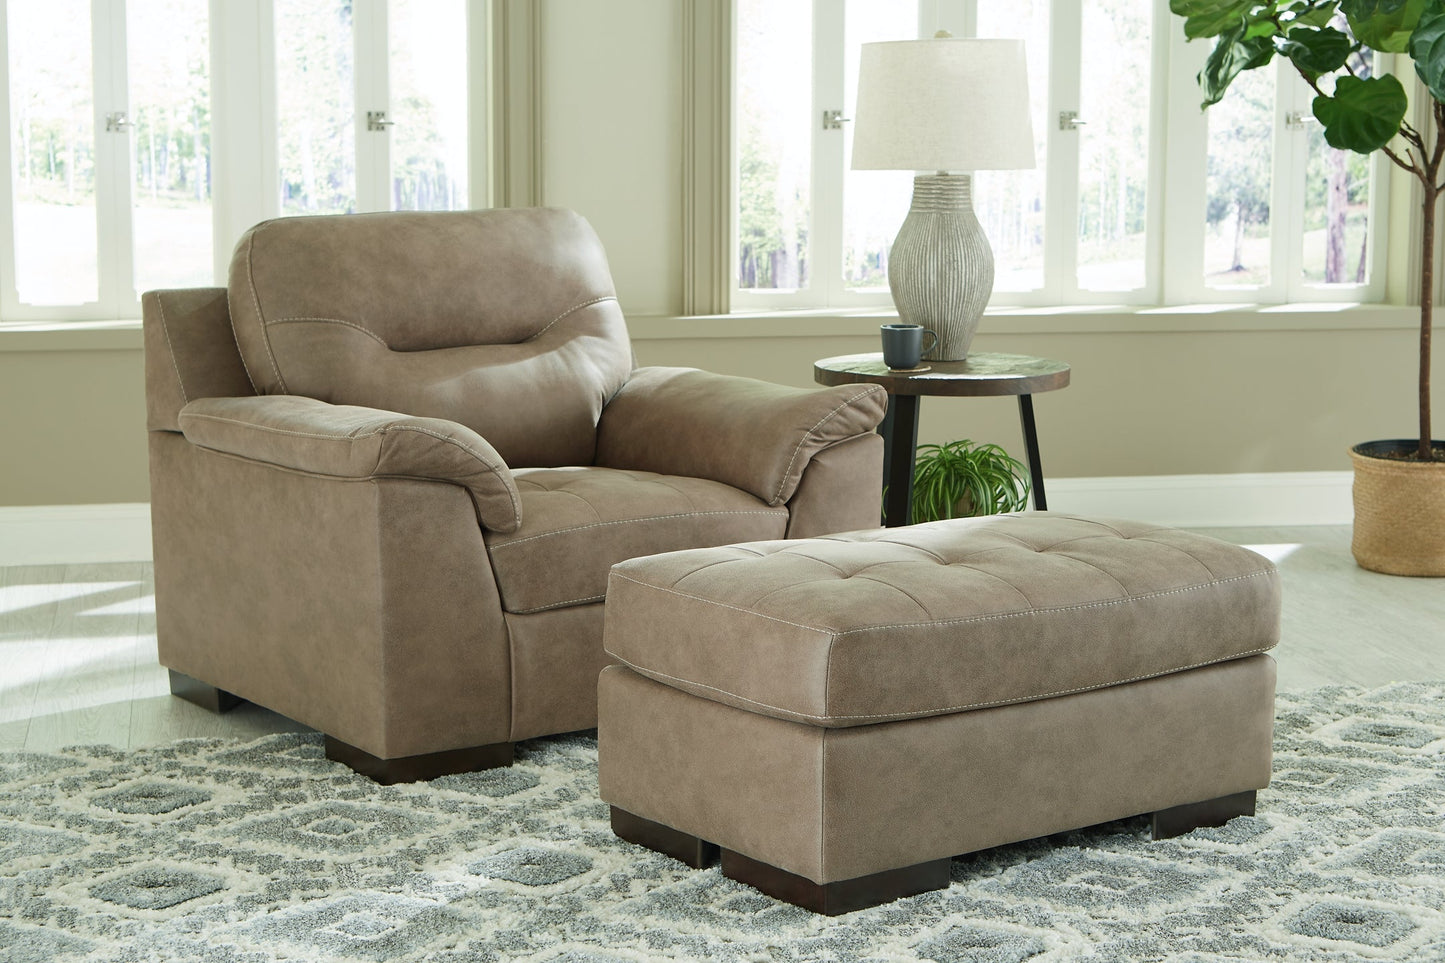 Maderla Chair and Ottoman Rent Wise Rent To Own Jacksonville, Florida